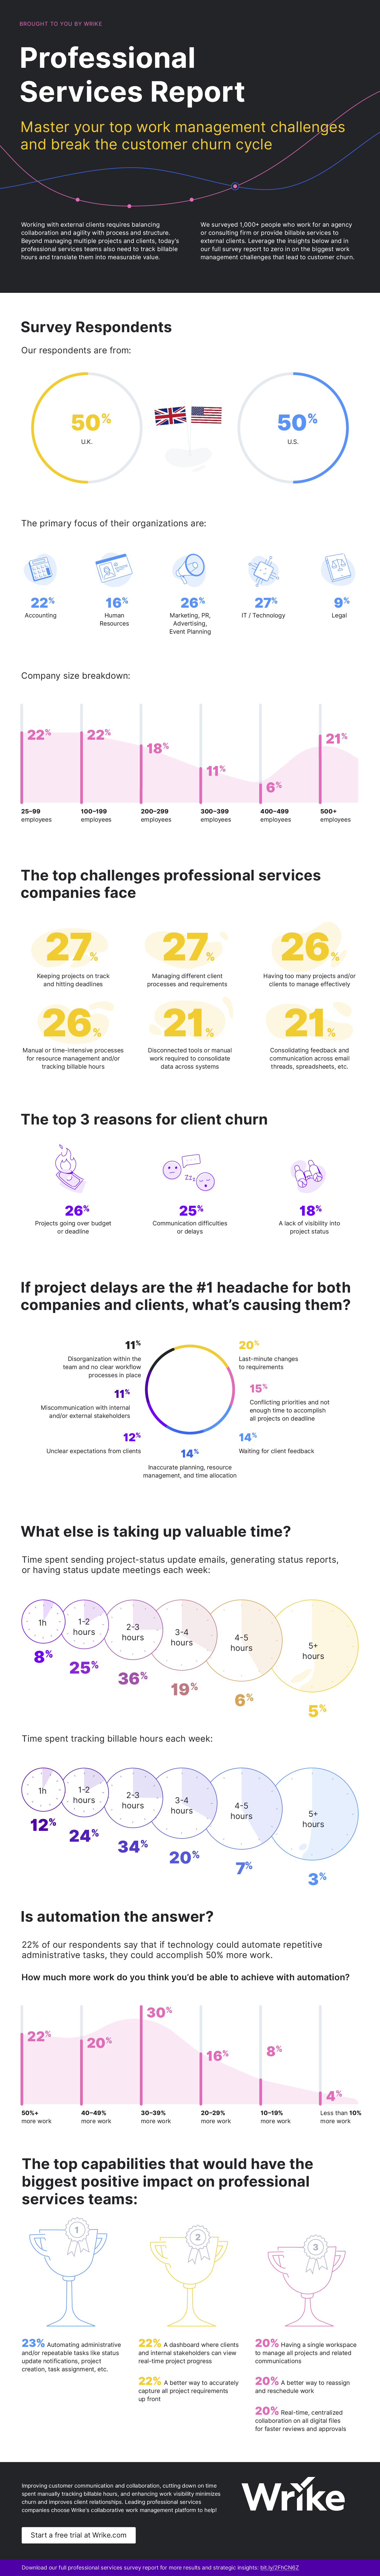 How Professional Services Teams are Breaking the Customer Churn Cycle Infographic 2